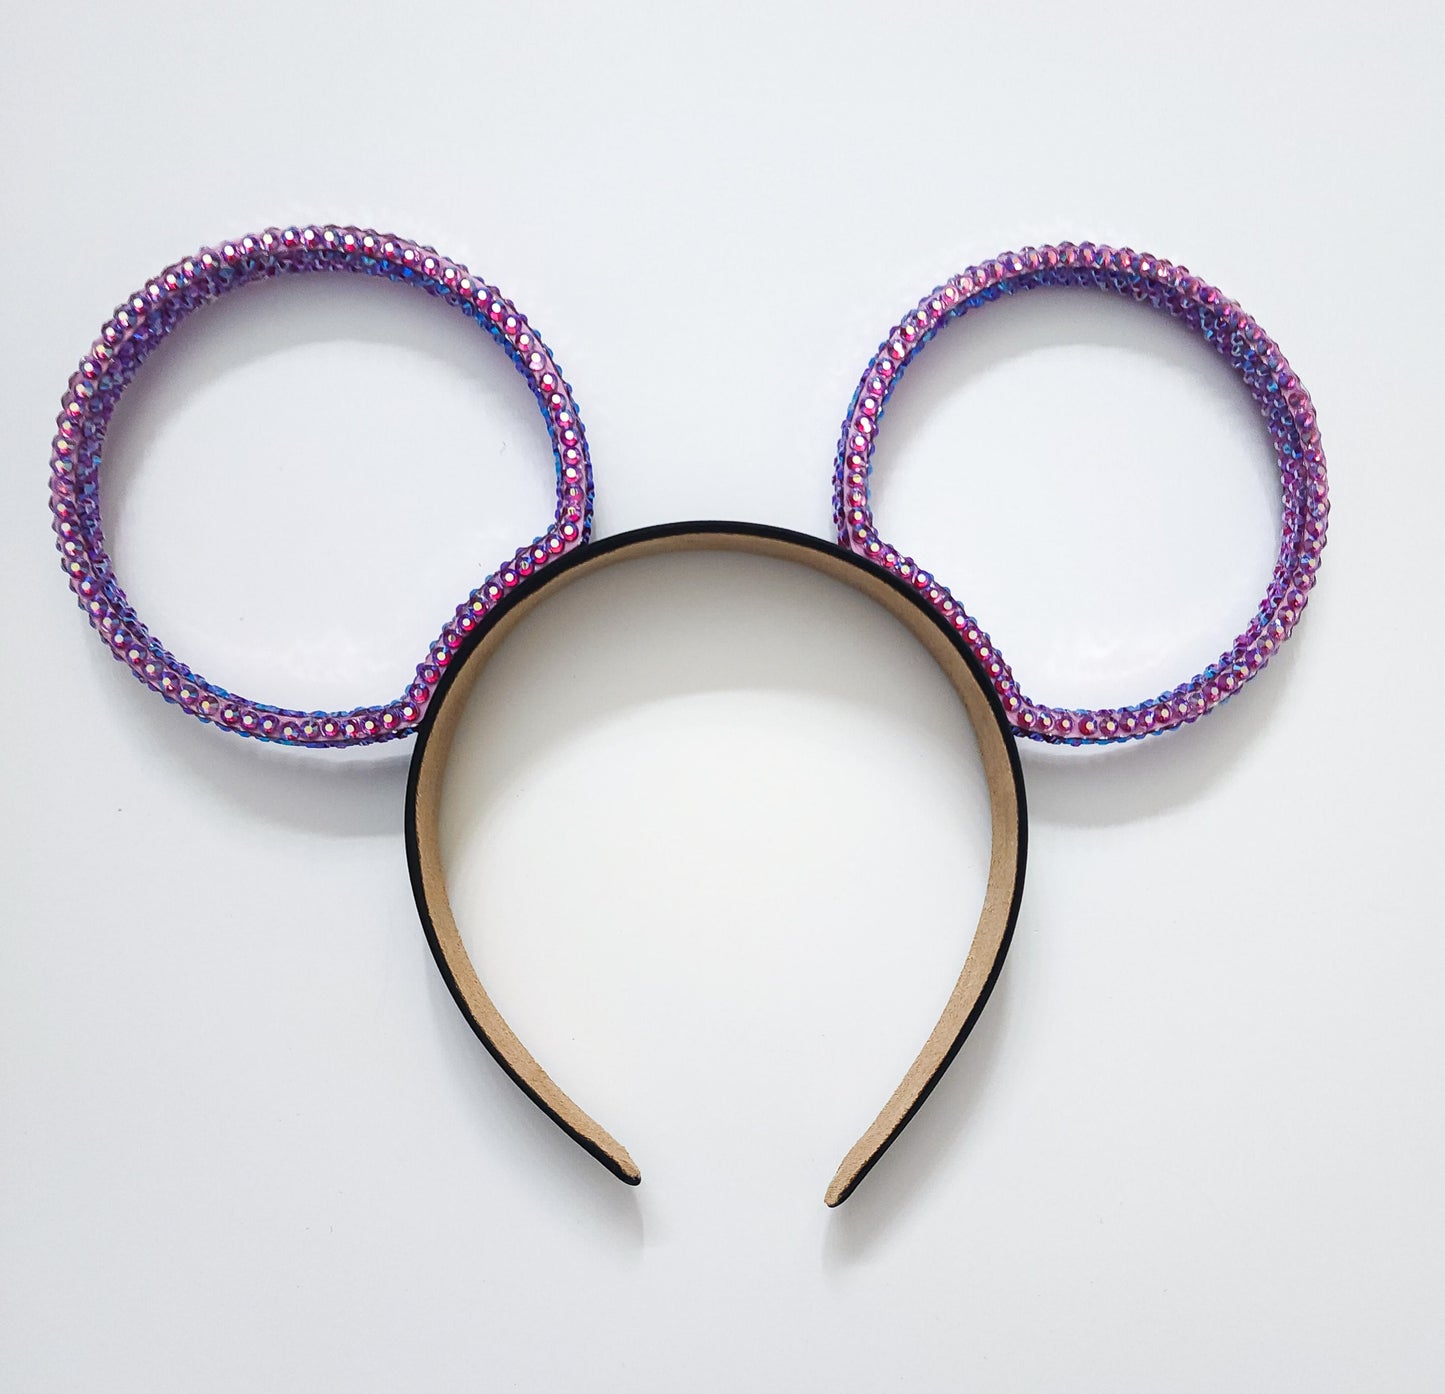 Magic Mountain ears ORIGINAL design-fuchsia AB Rhinestone pink rings 3D Mouse Ears all sides covered with rhinestones